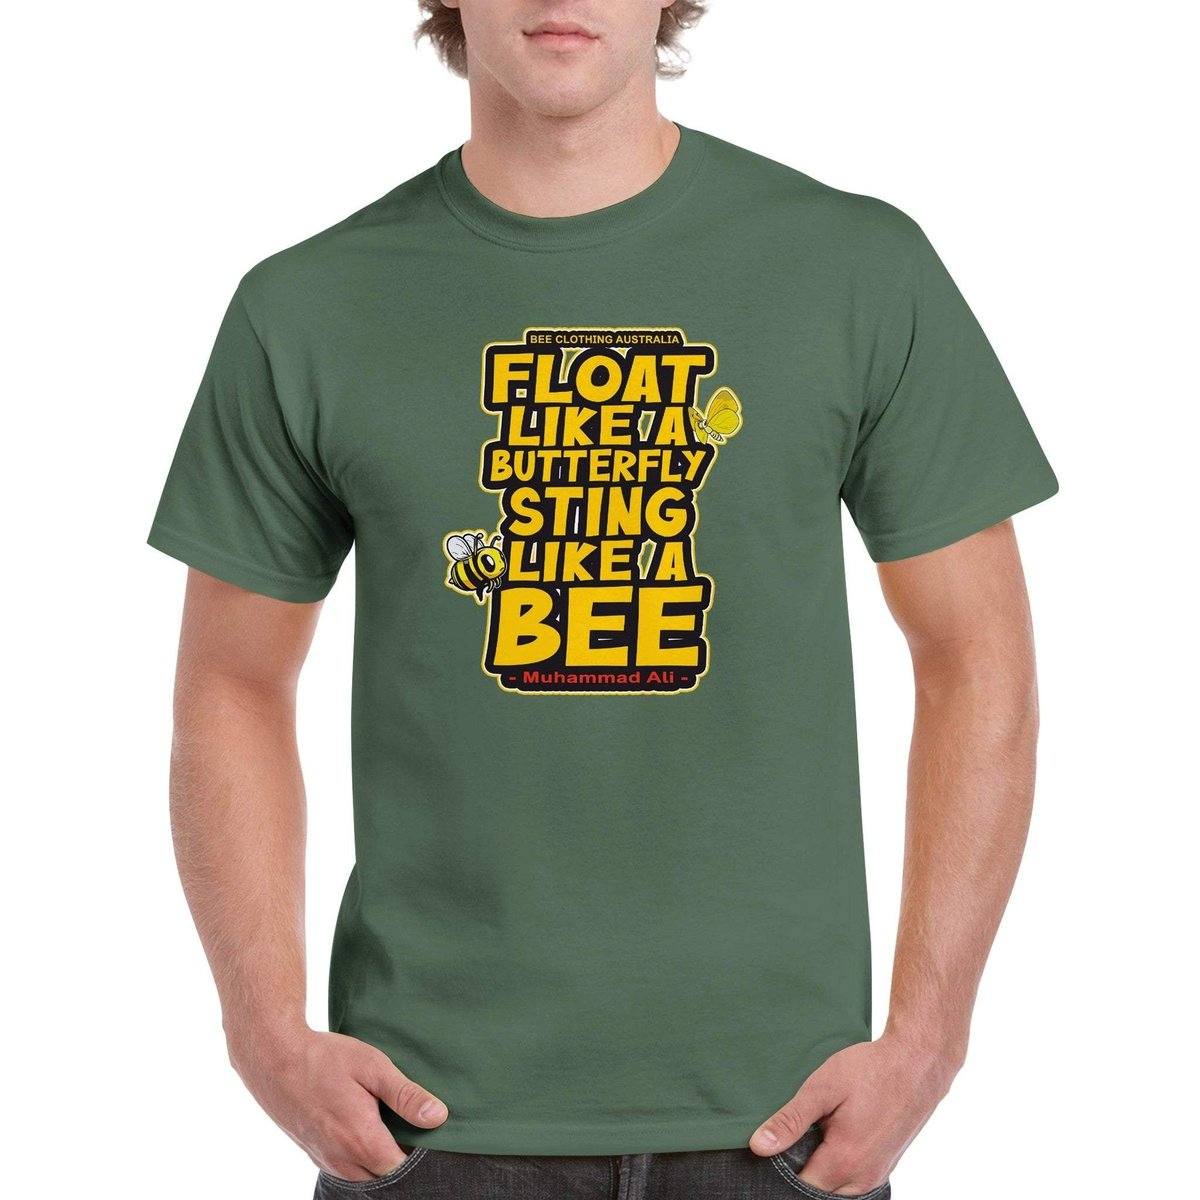 Float Like A butterfly Sting Like A Bee T-Shirt - Muhammad Ali - beekeeper Tshirt - Unisex Crewneck T-shirt Australia Online Color Military Green / S